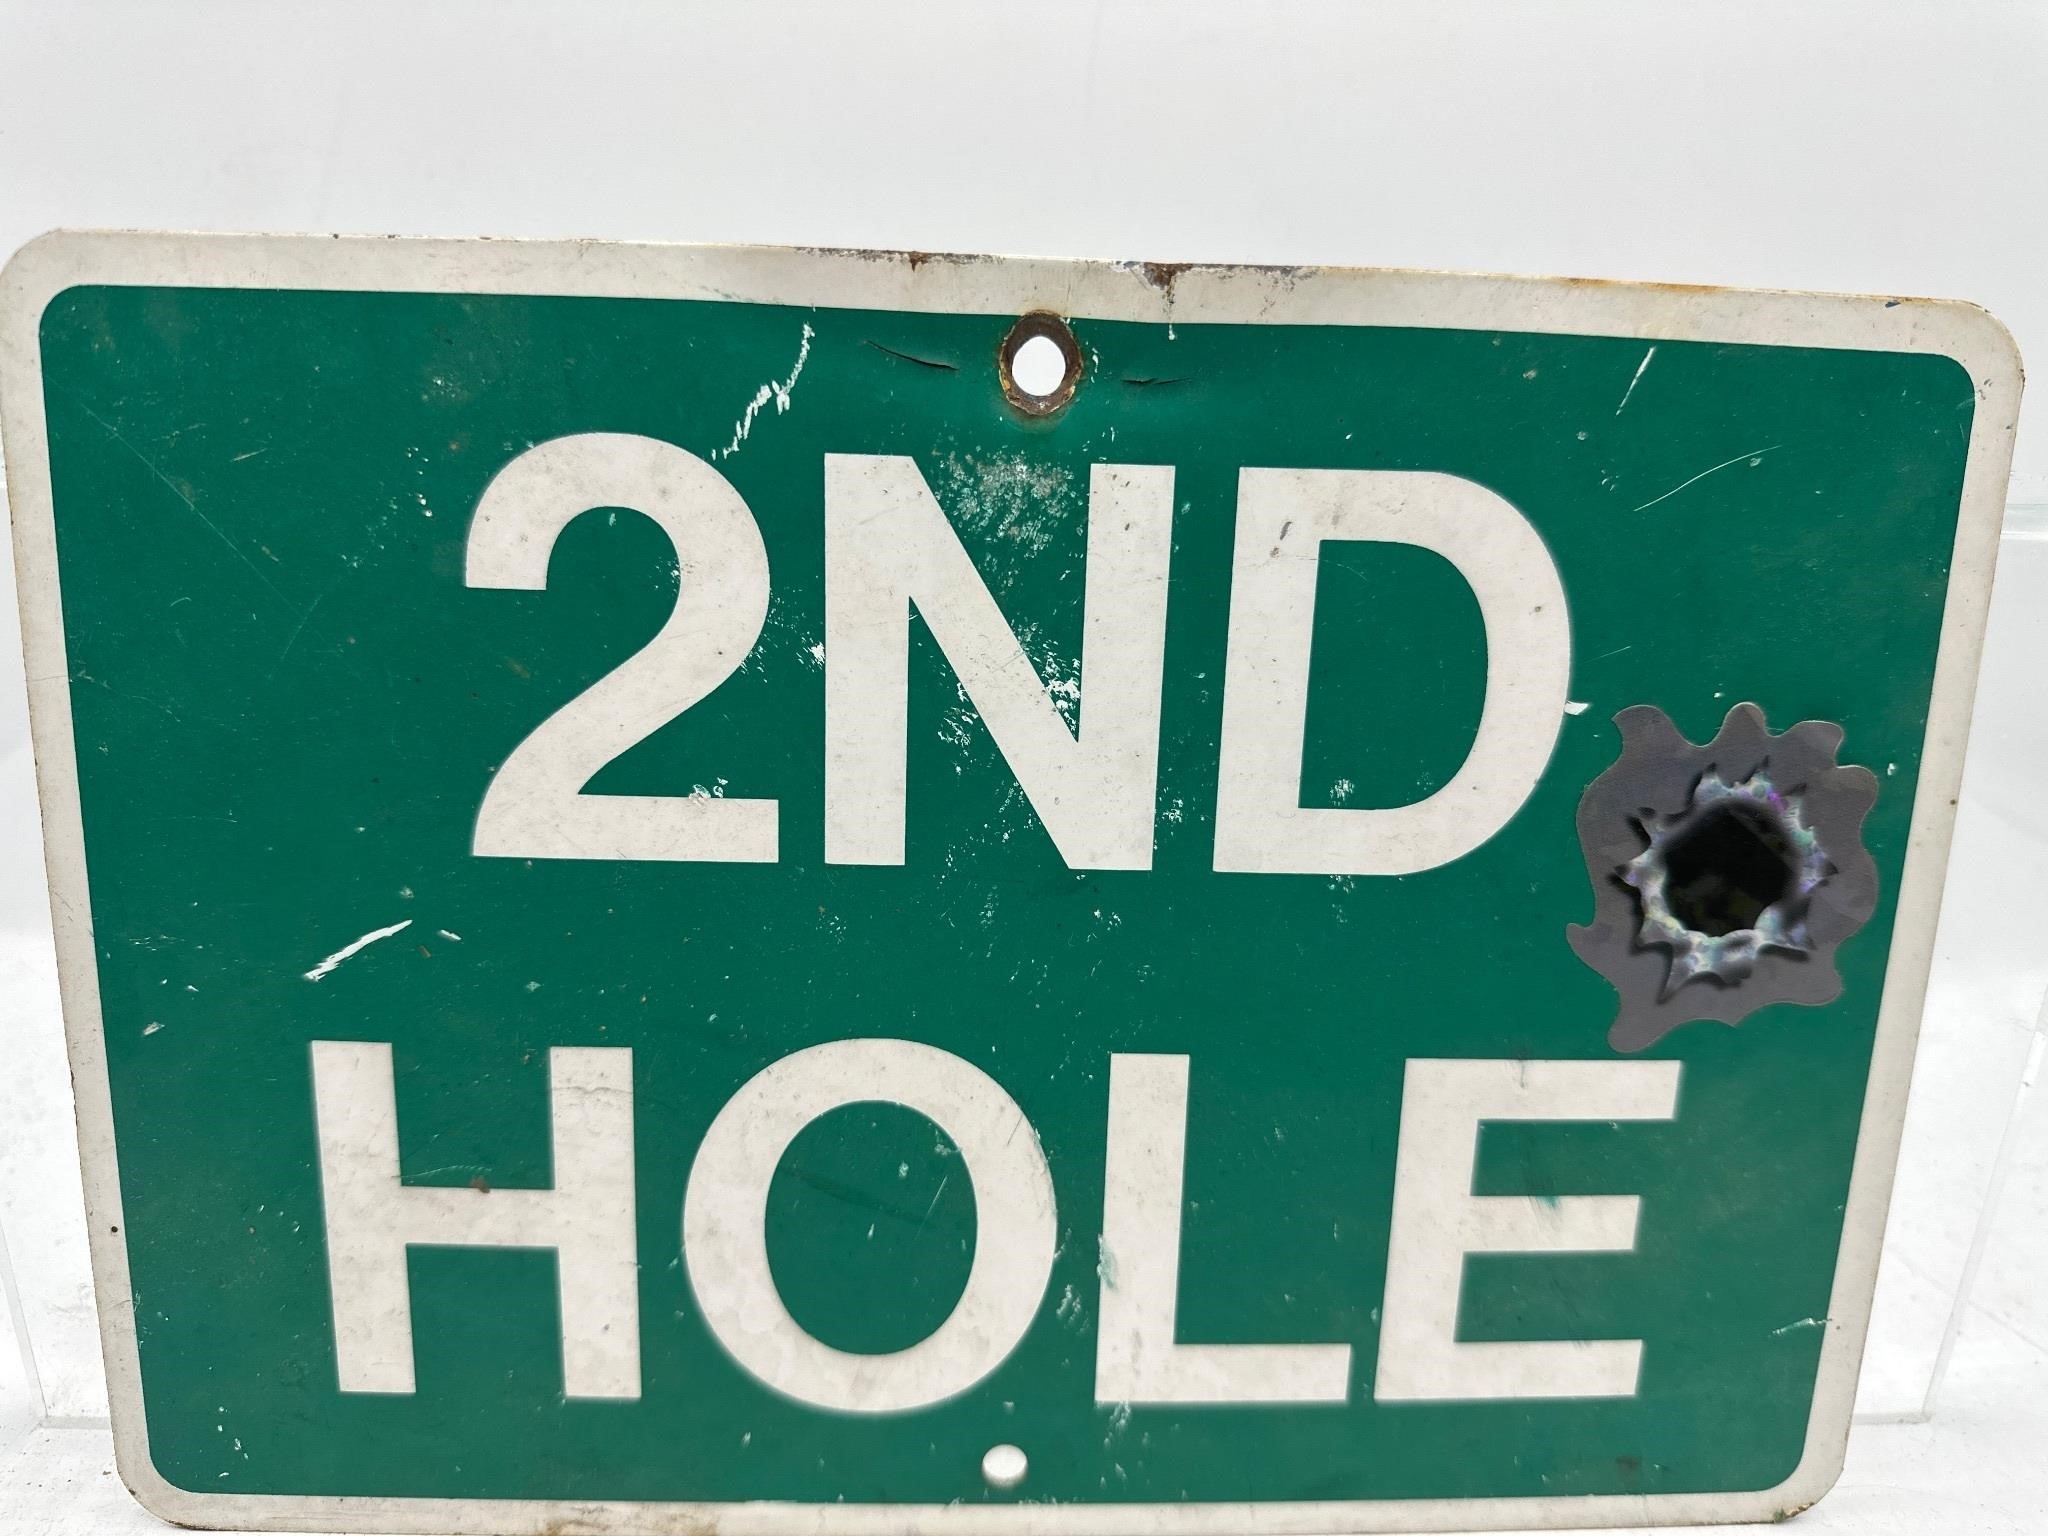 Metal 2nd hole sign